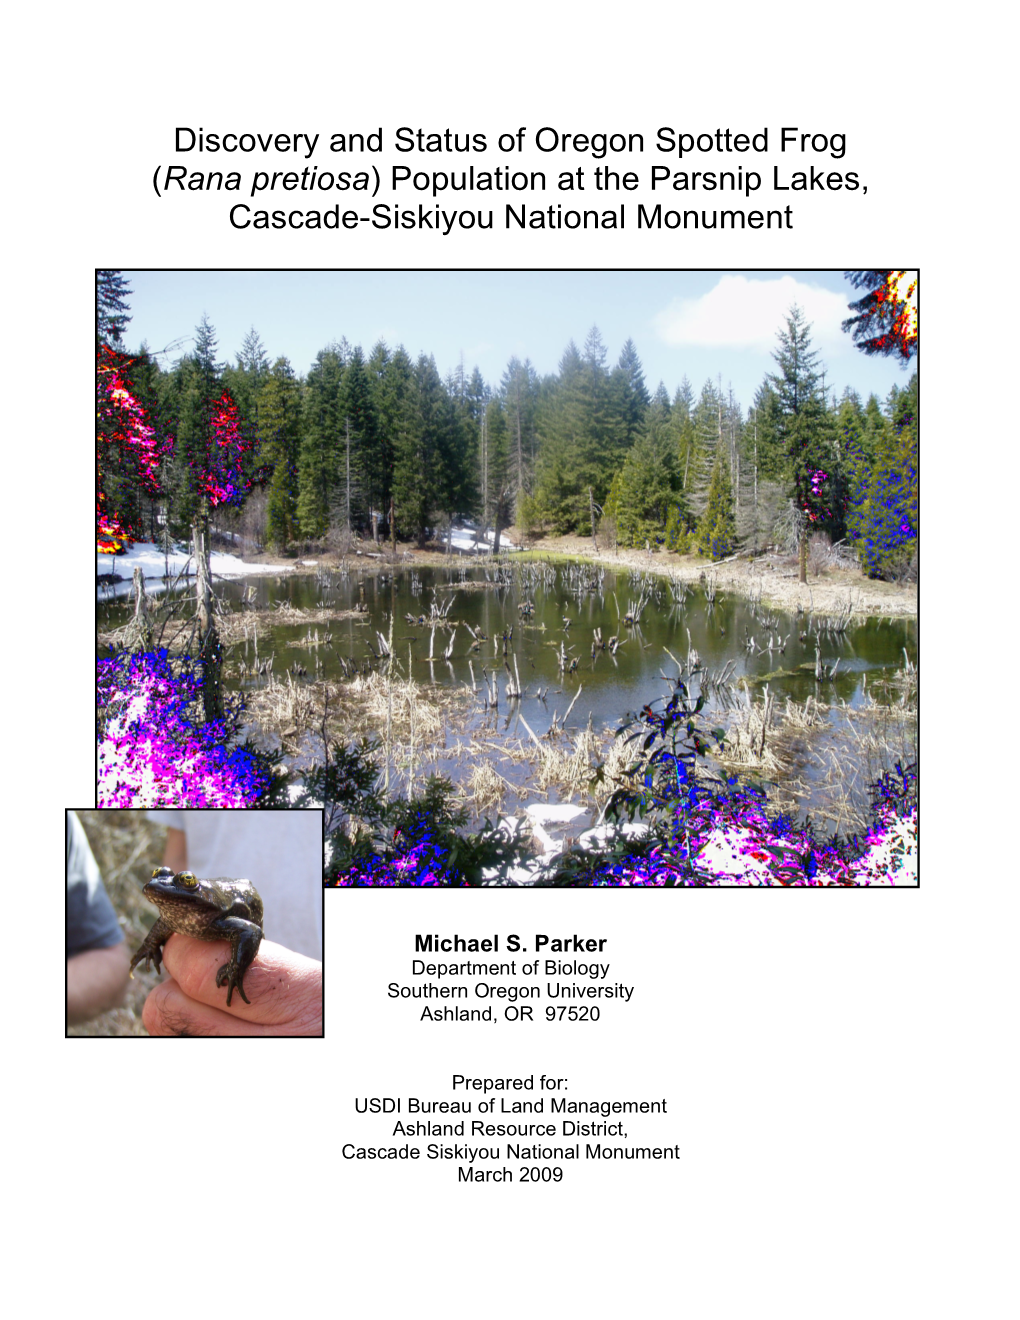 Discovery and Status of Oregon Spotted Frog (Rana Pretiosa) Population at the Parsnip Lakes, Cascade-Siskiyou National Monument